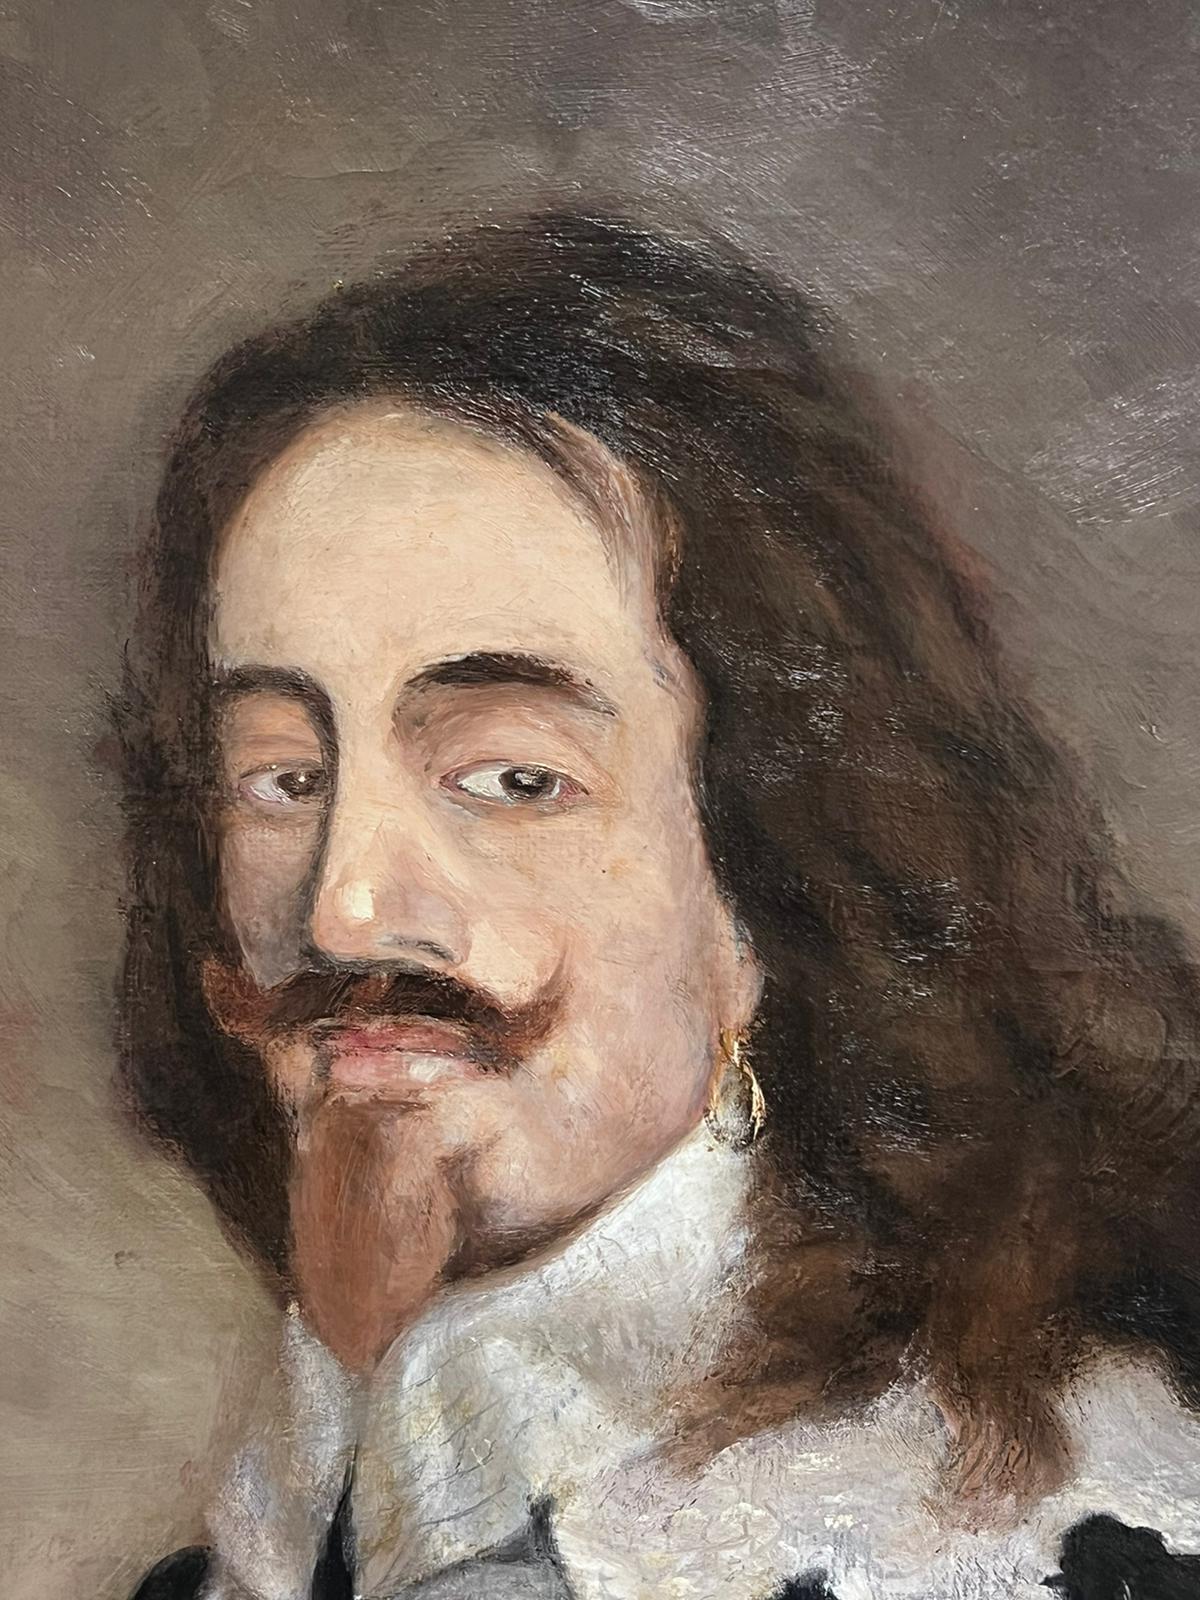 King Charles I
British artist, early 20th century
signed with initials
oil on canvas, framed
framed: 36 x 29 inches
canvas: 32 x 26 inches
provenance: private collection, UK
condition: a few minor scuffs but overall good and sound condition, due to